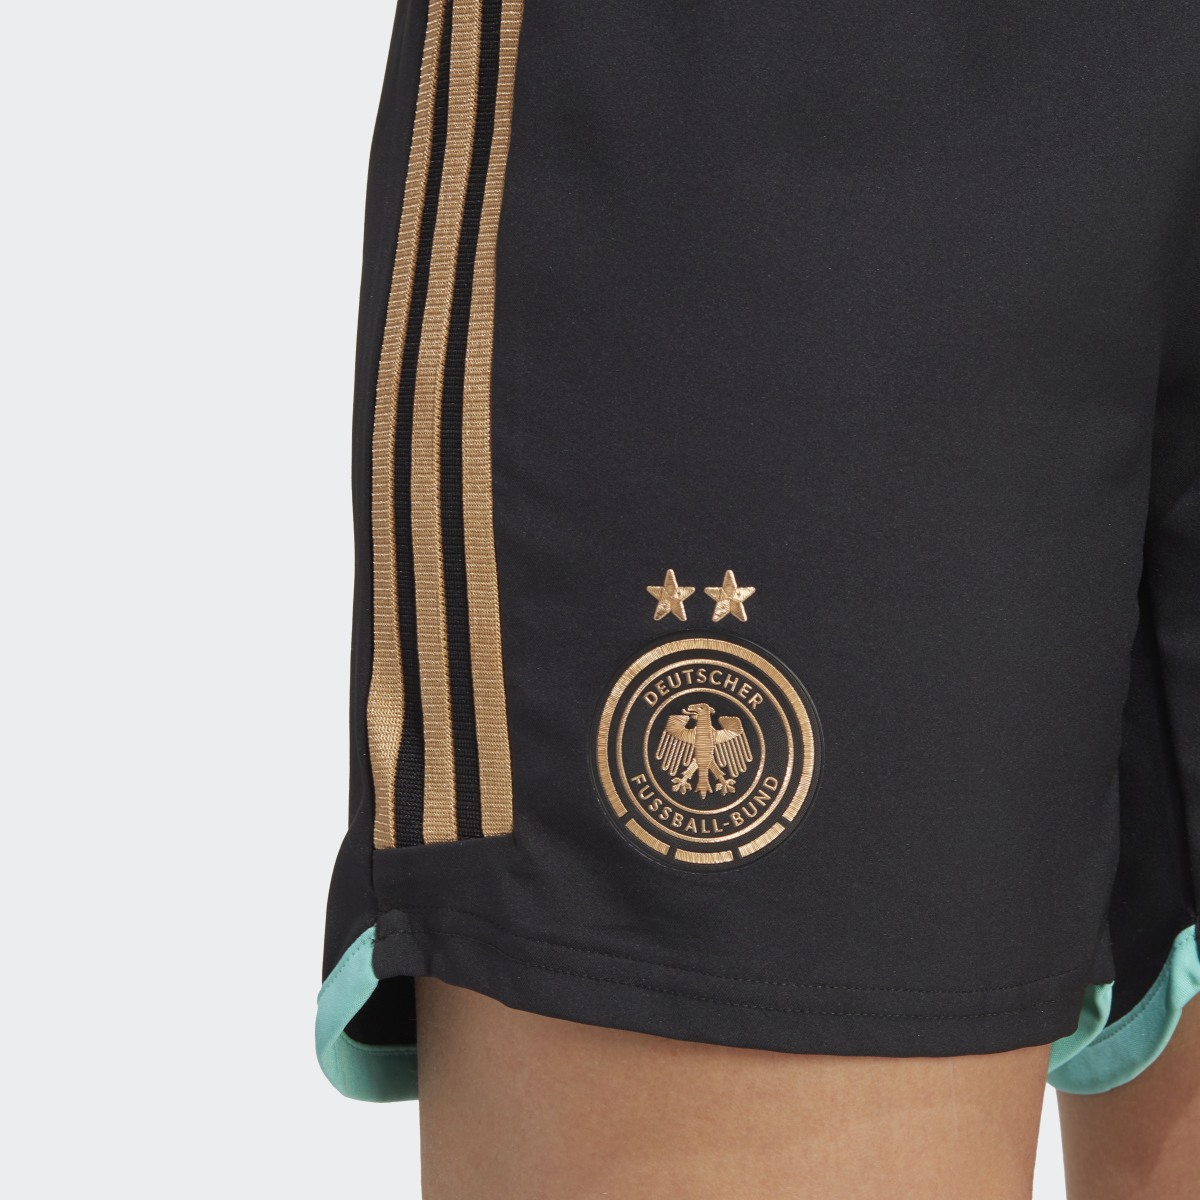 Adidas Germany Women's Team 23 Away Authentic Shorts. 5